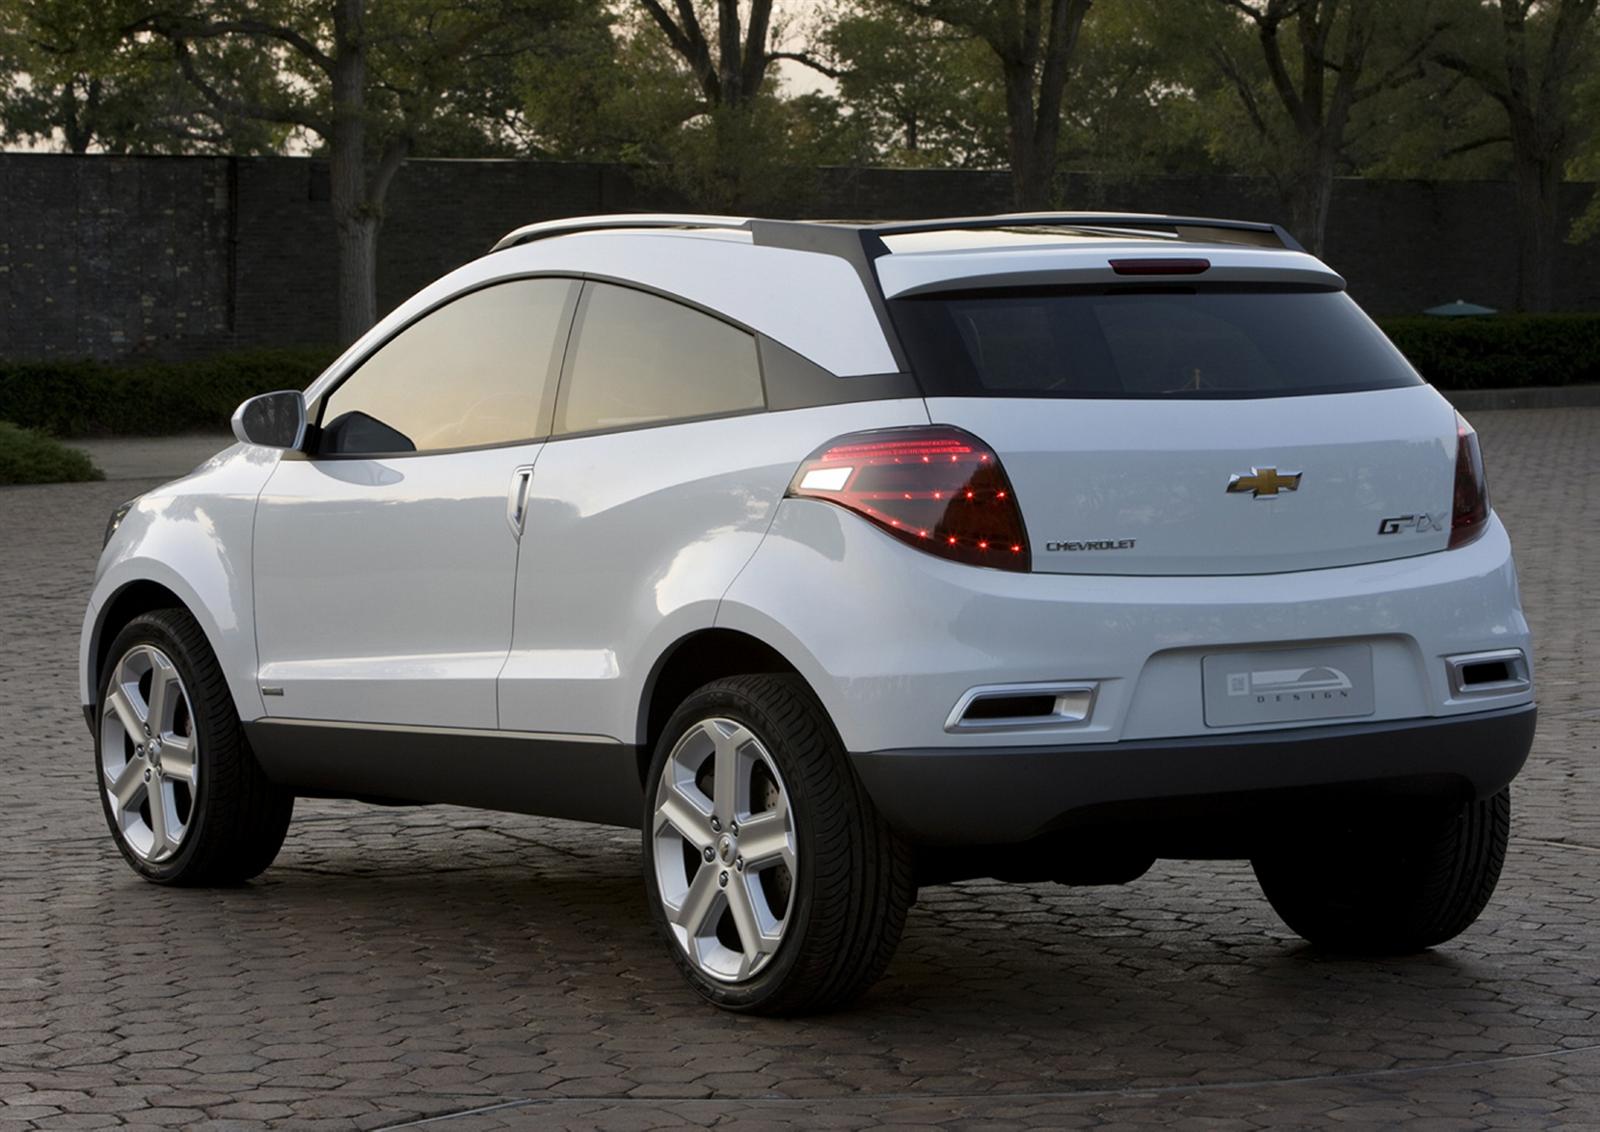 2009 Chevrolet GPiX Crossover Coupe Concept